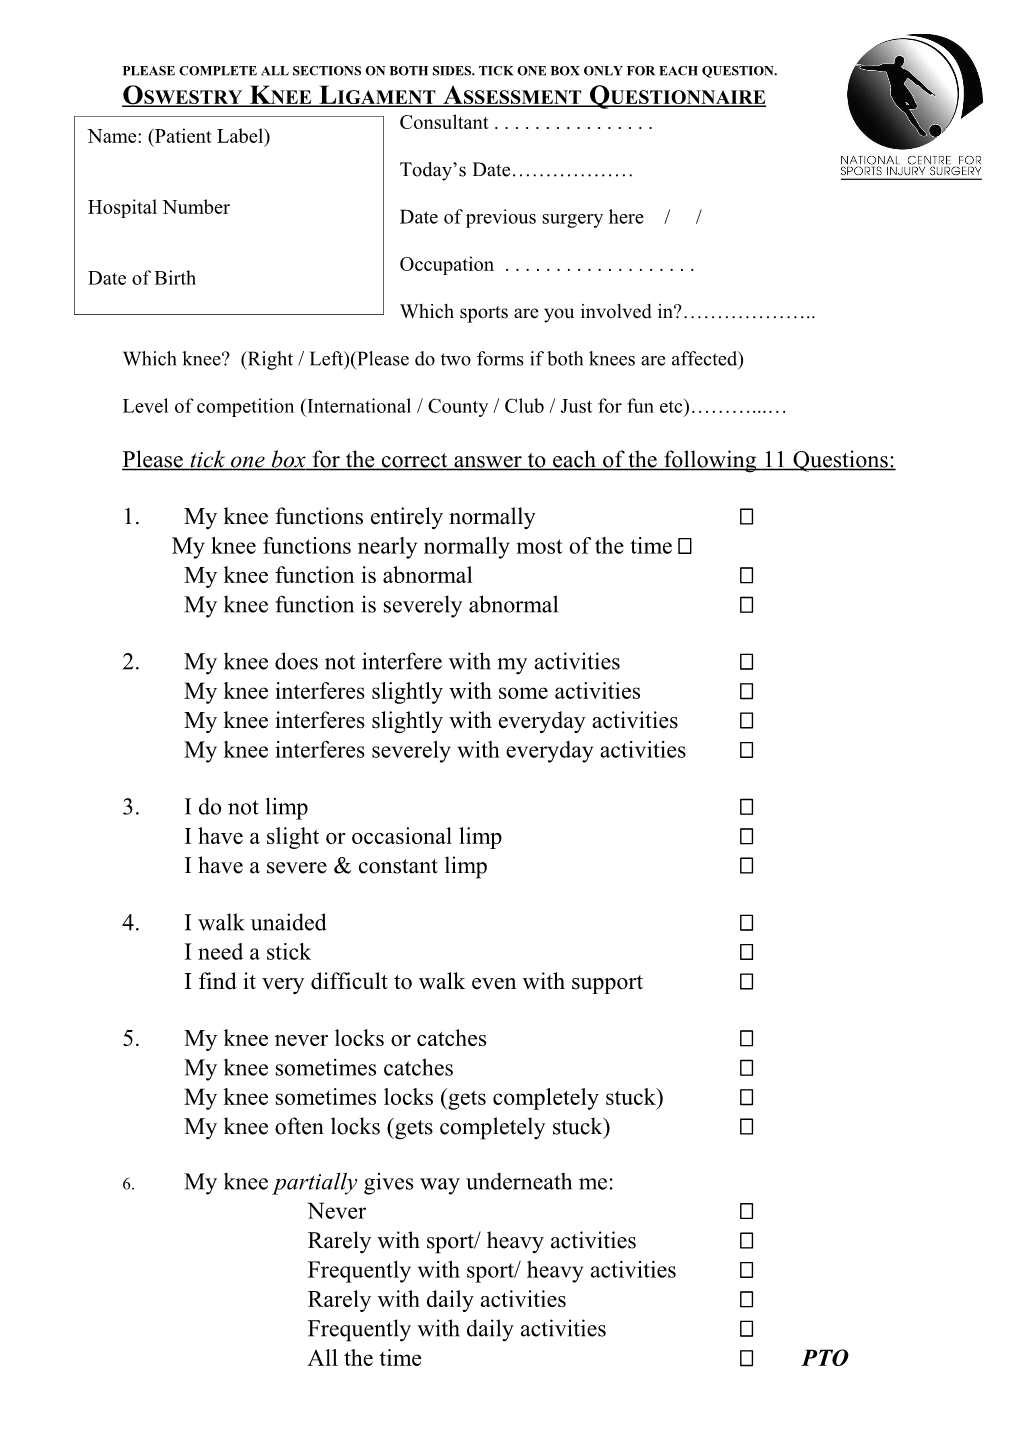 Oswestry Knee Ligament Assessment Questionnaire